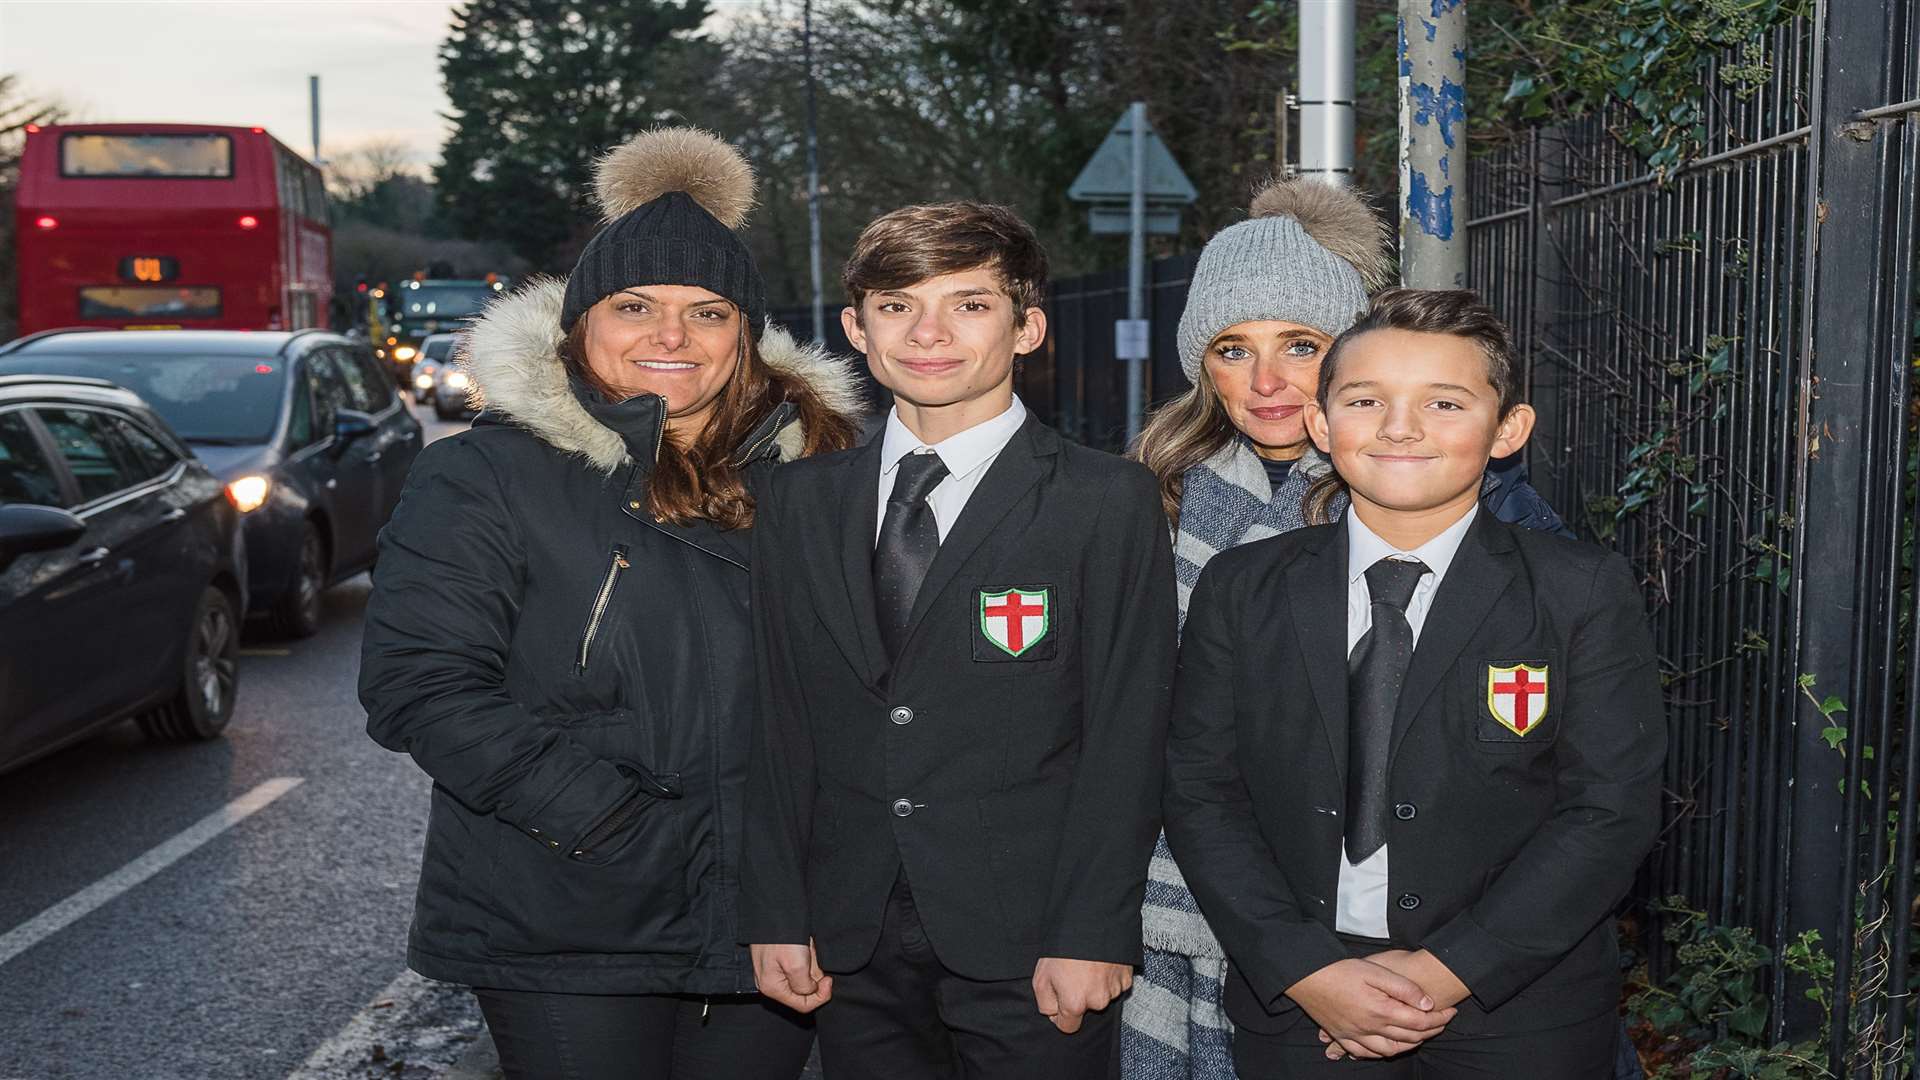 Sangita Hornett and son, Freddie, together with Genene Copley and son, Samuel, who are pupils of Saint George's Church of England Secondary School, Gravesend